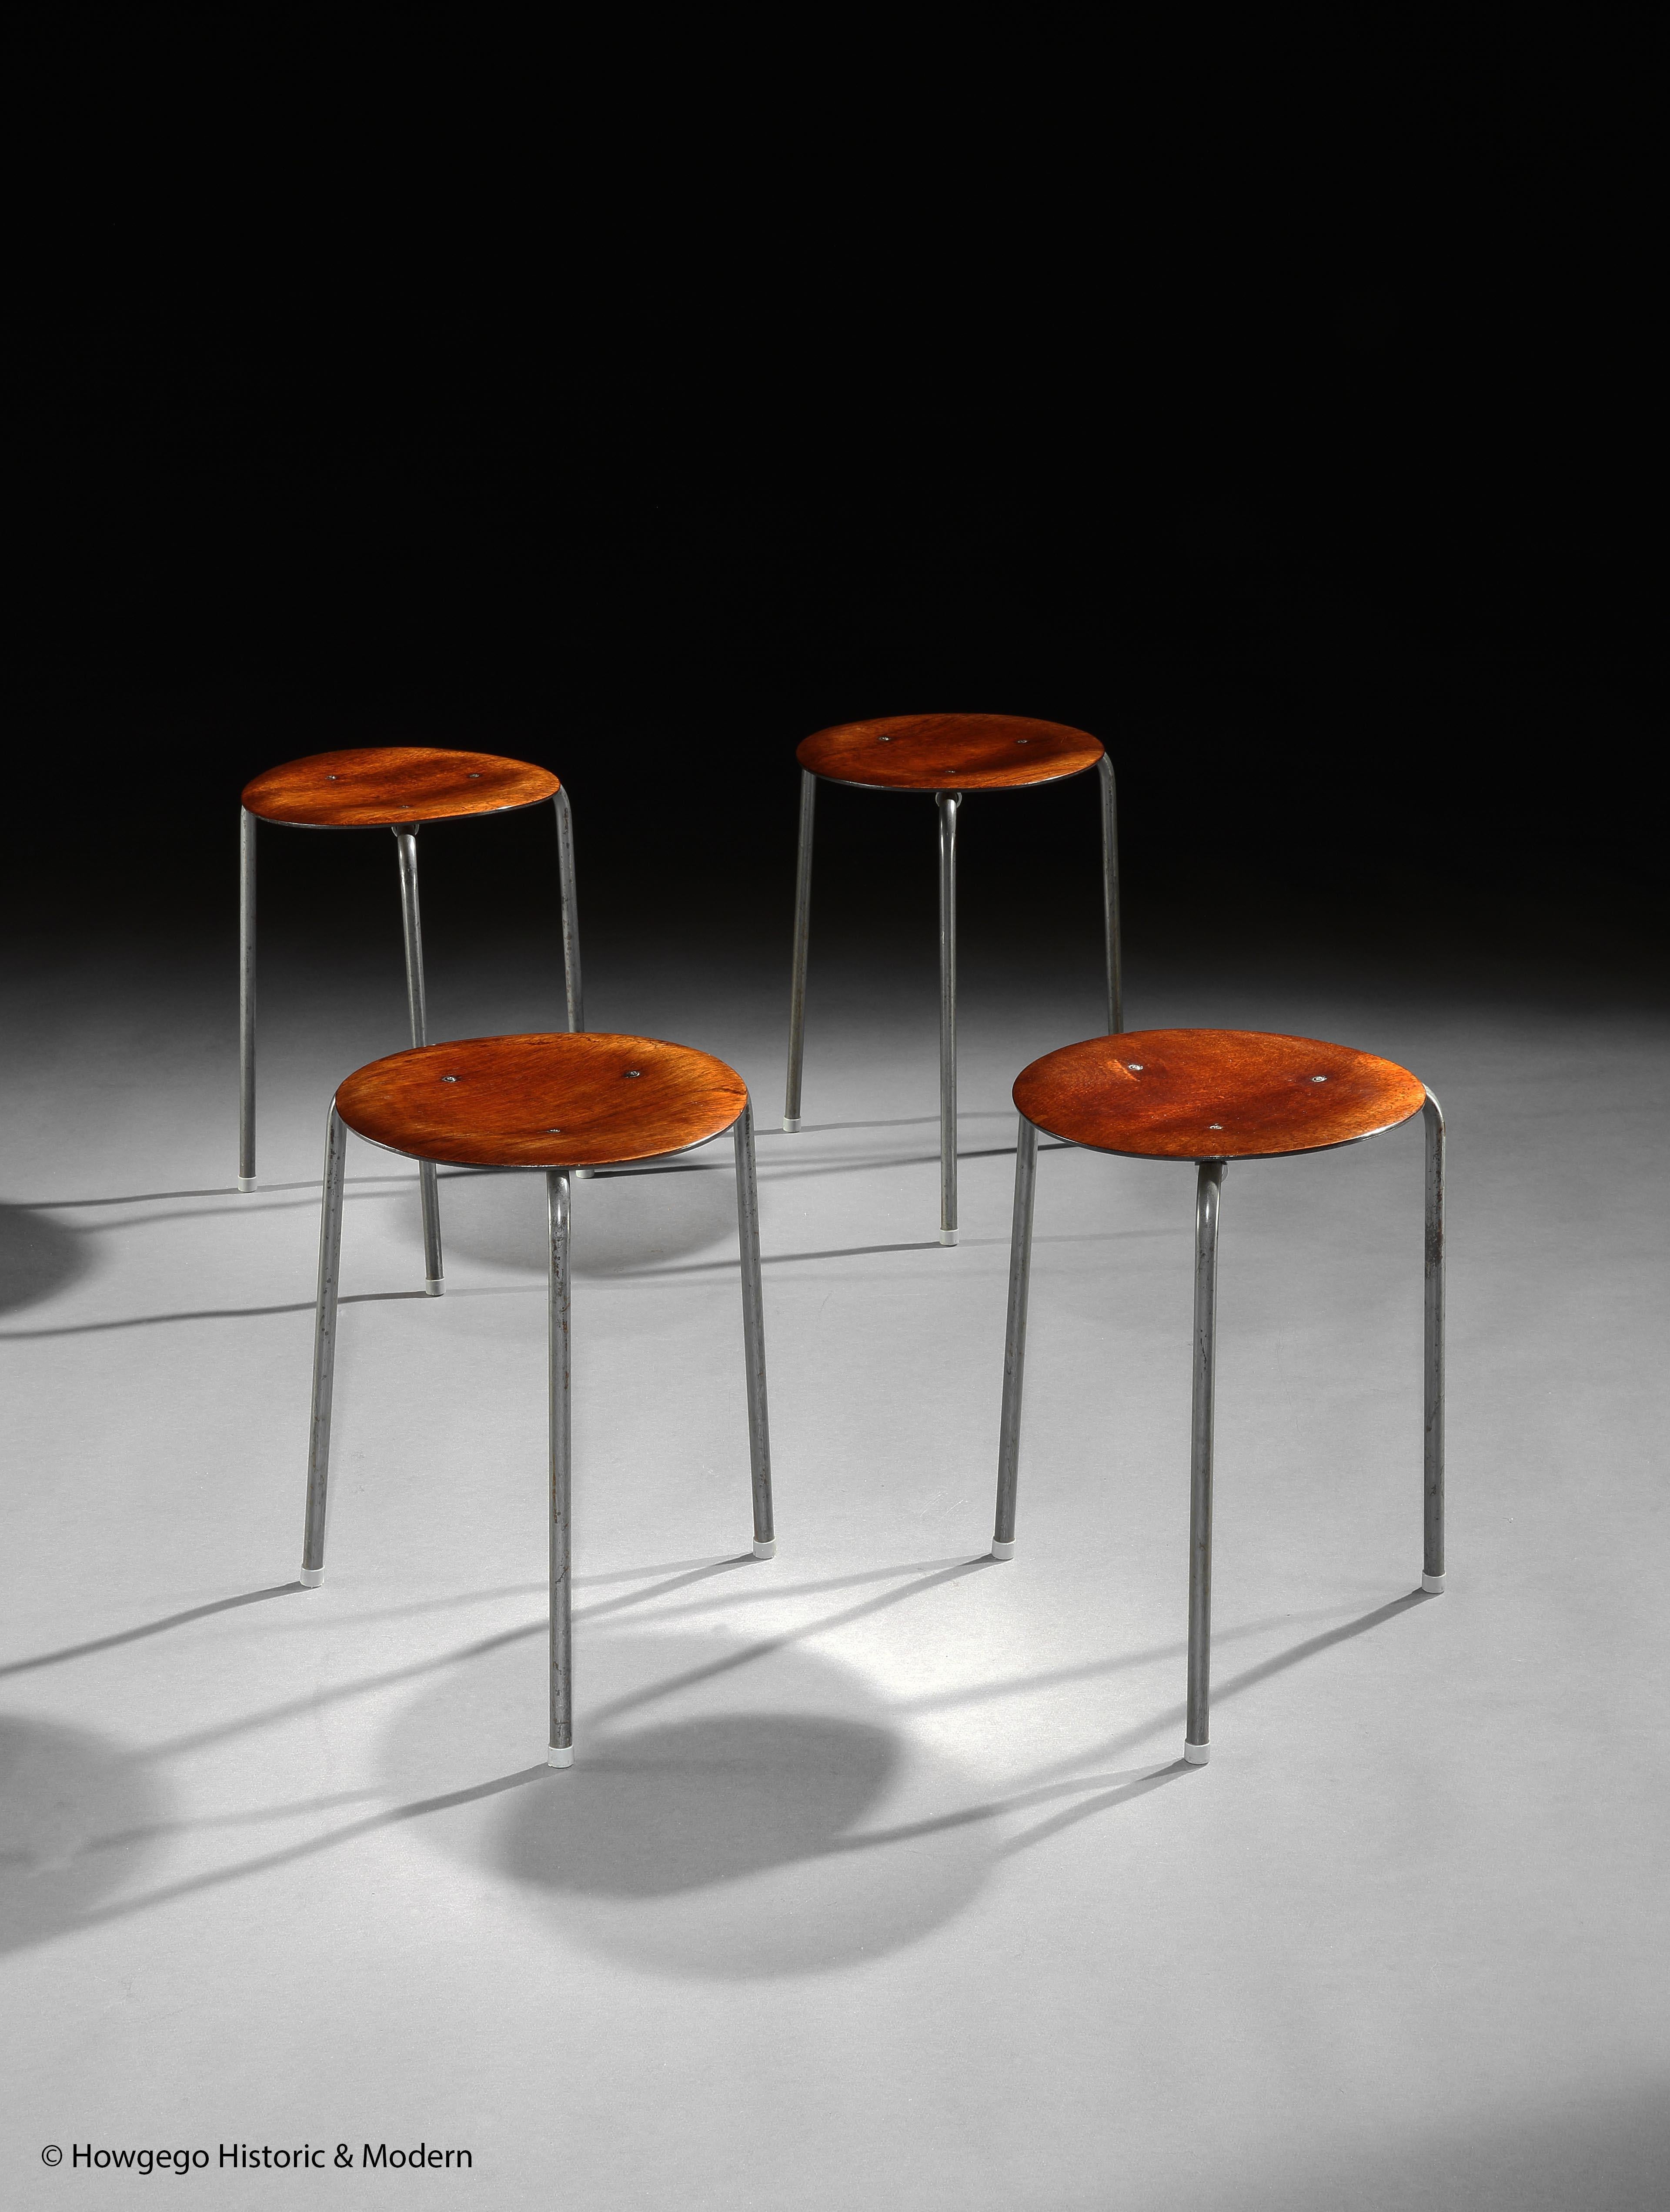 - Exceptional set of four, Mid-Century Modern Dot stools in original condition with teak seats on three chrome legs with the original grey plastic cappings on the feet.
- These dot stools inject Classic elegance into an interior and are suitable